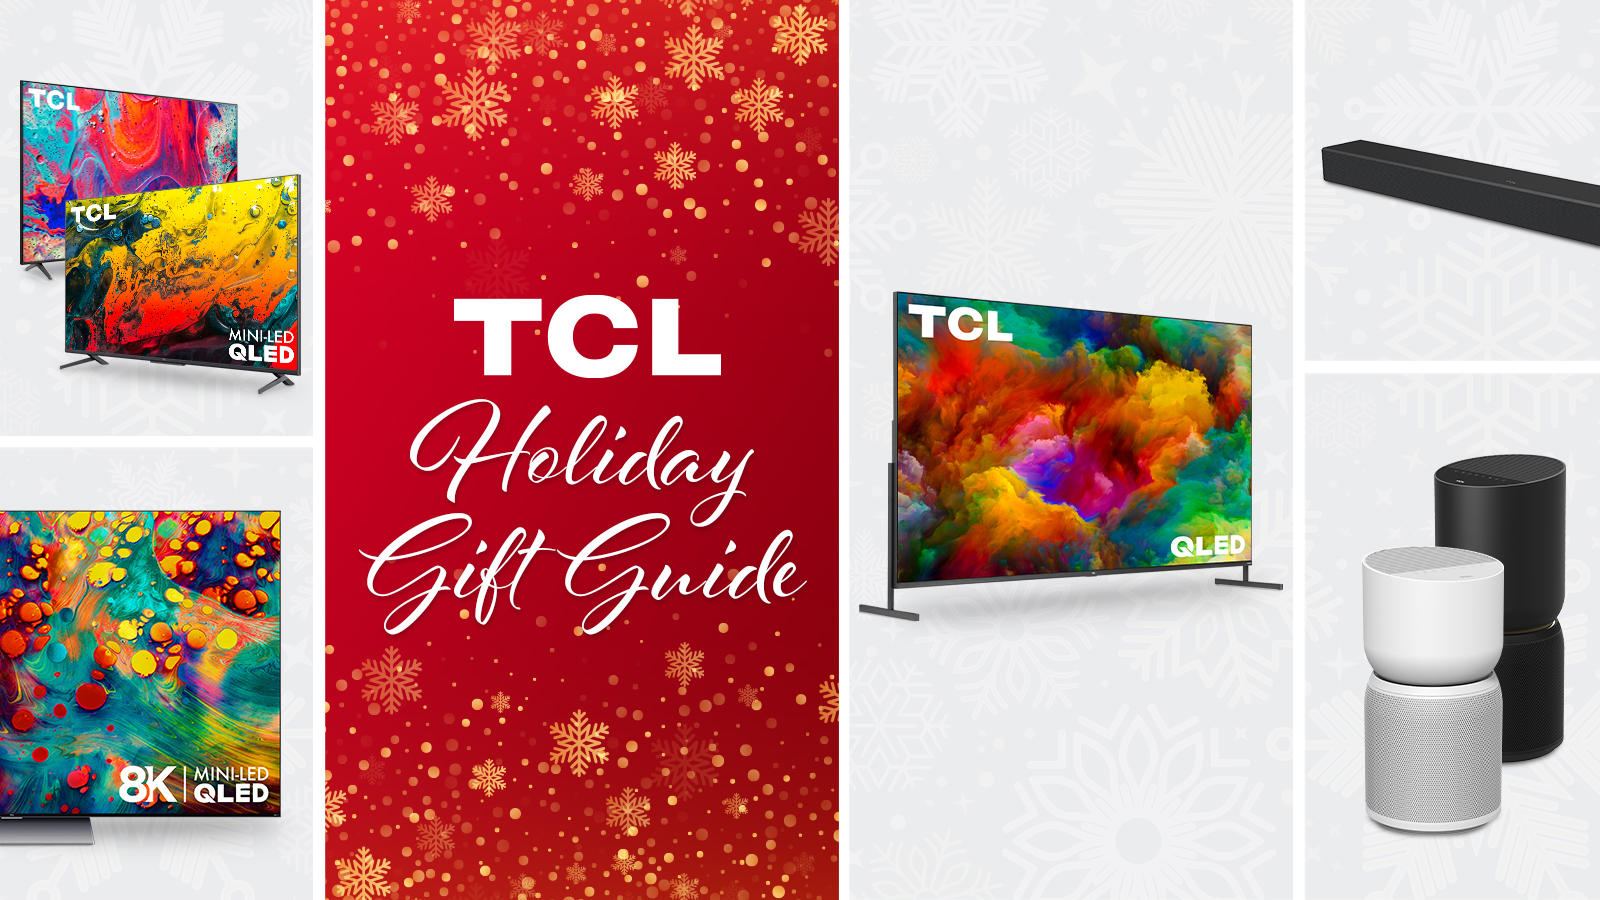 TCL Holiday Gift Guide